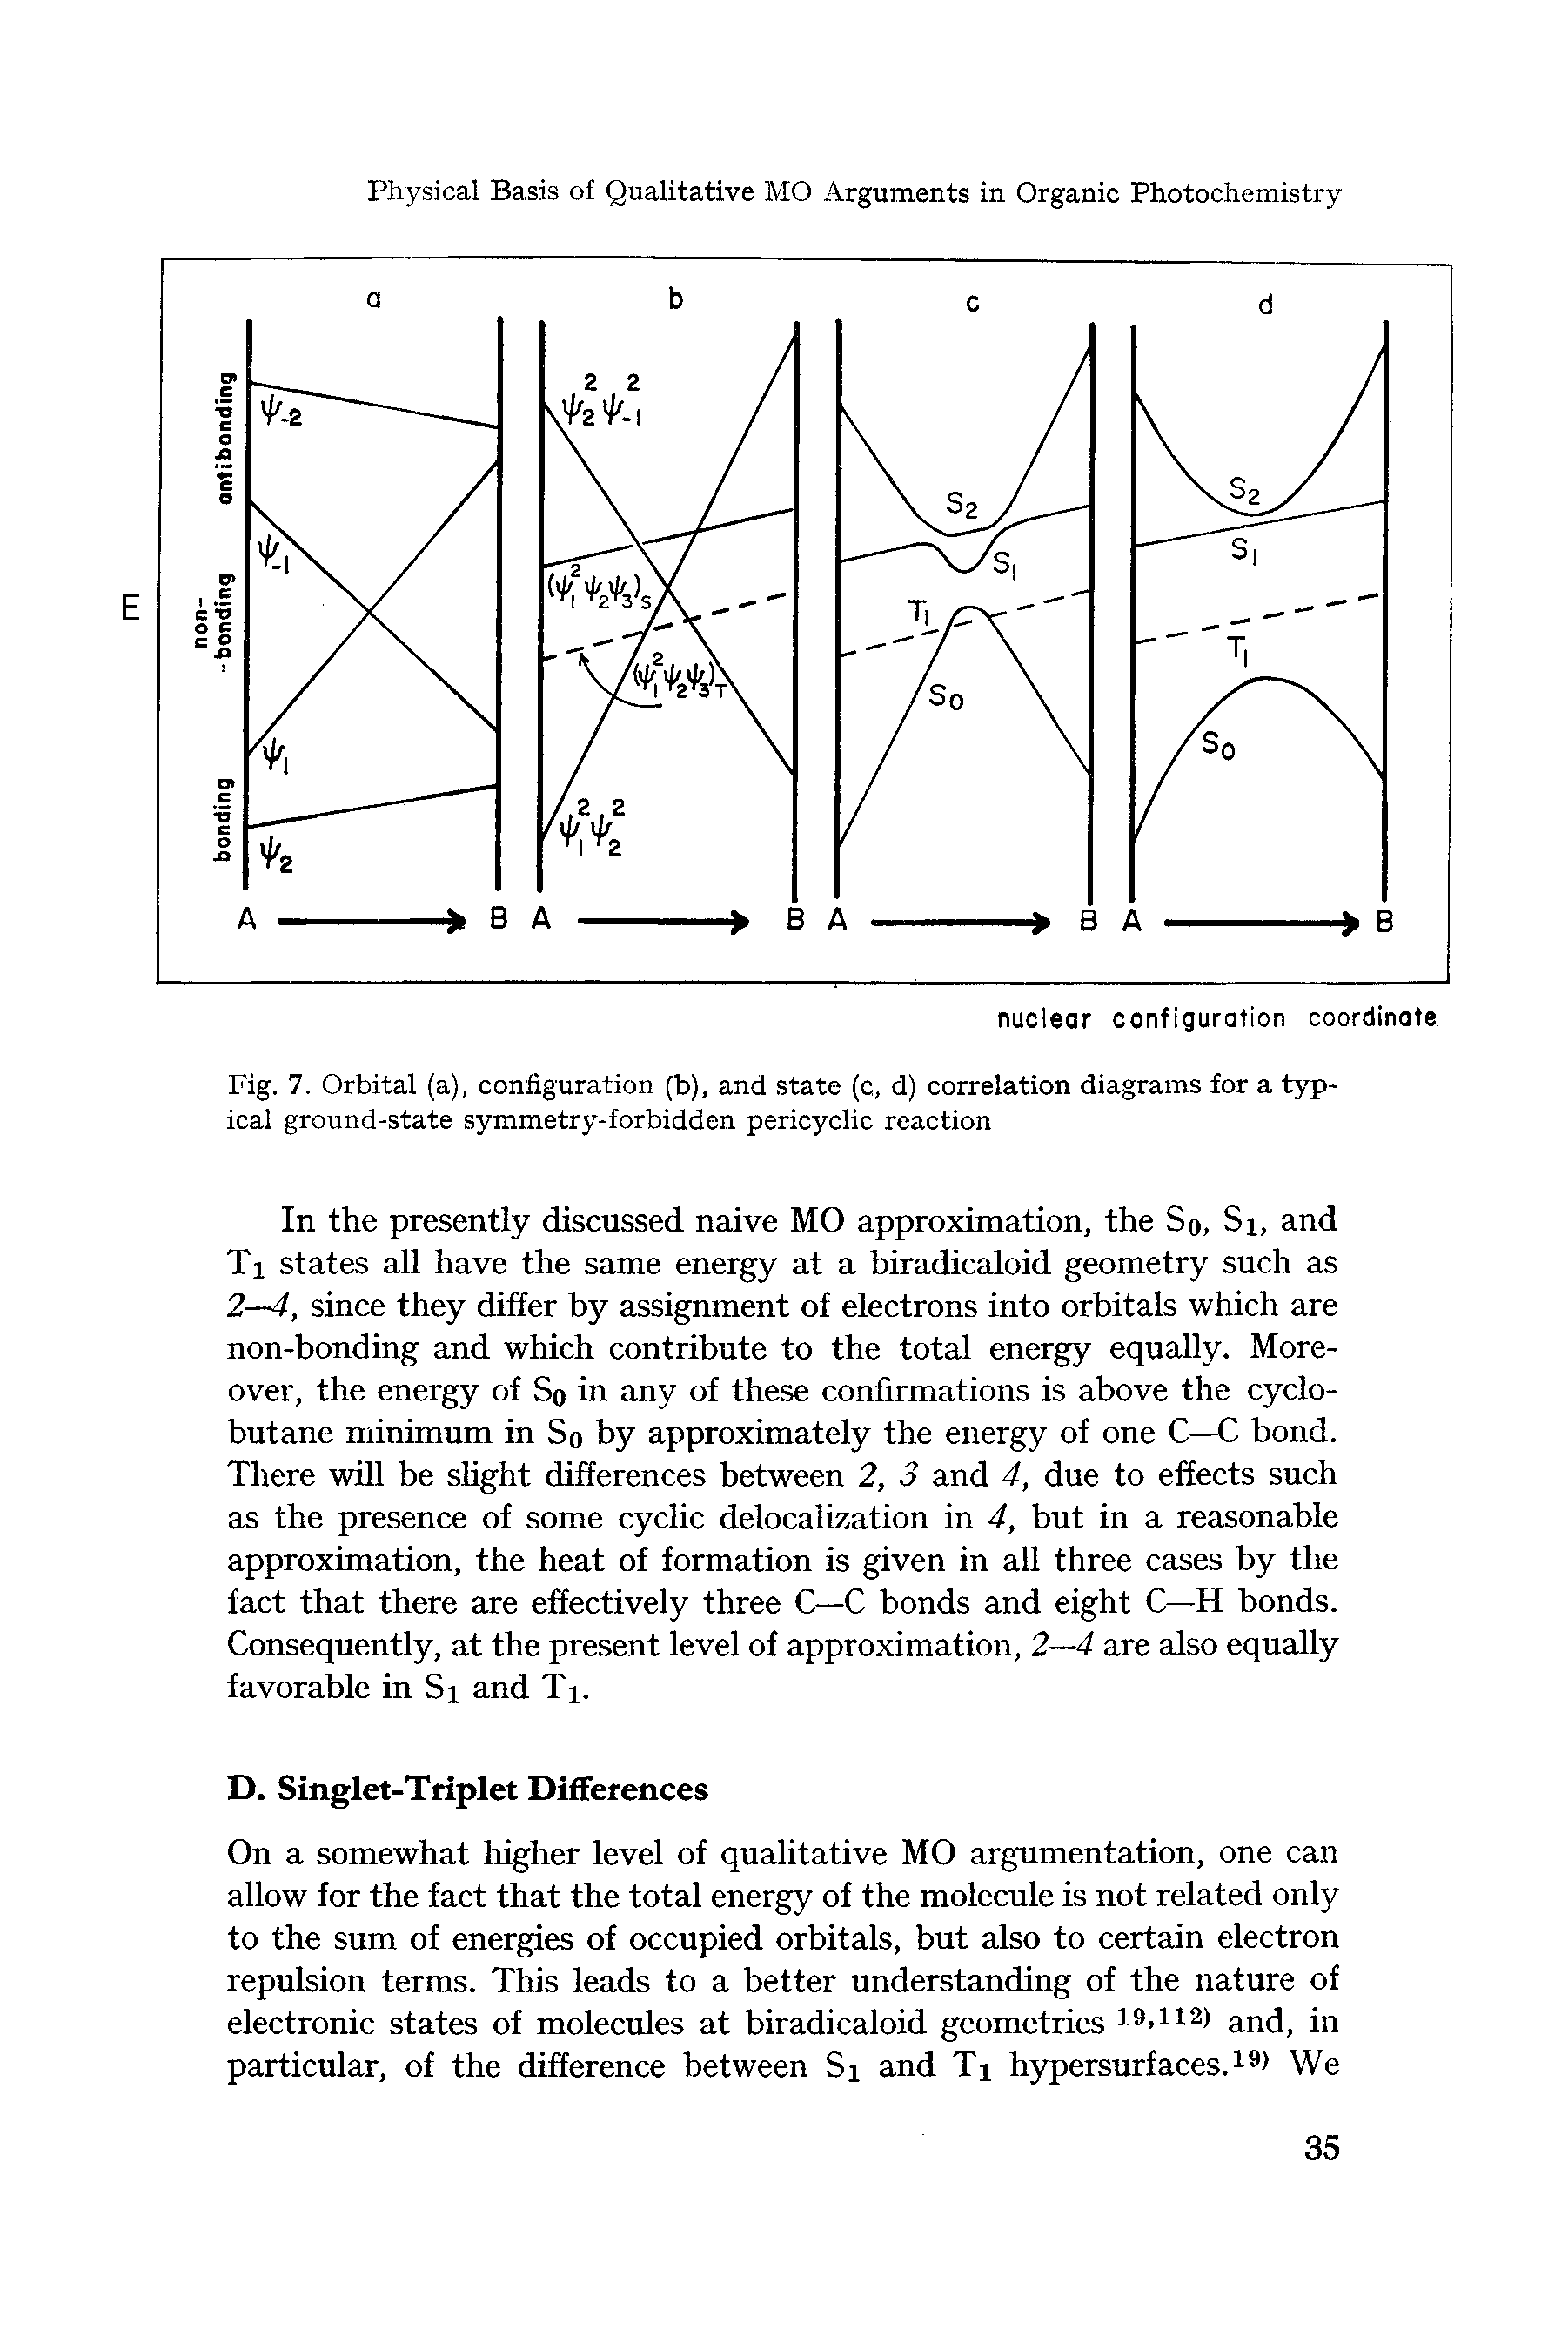 Fig. 7. Orbital (a), configuration (b), and state (c, d) correlation diagrams for a typical ground-state symmetry-forbidden pericyclic reaction...